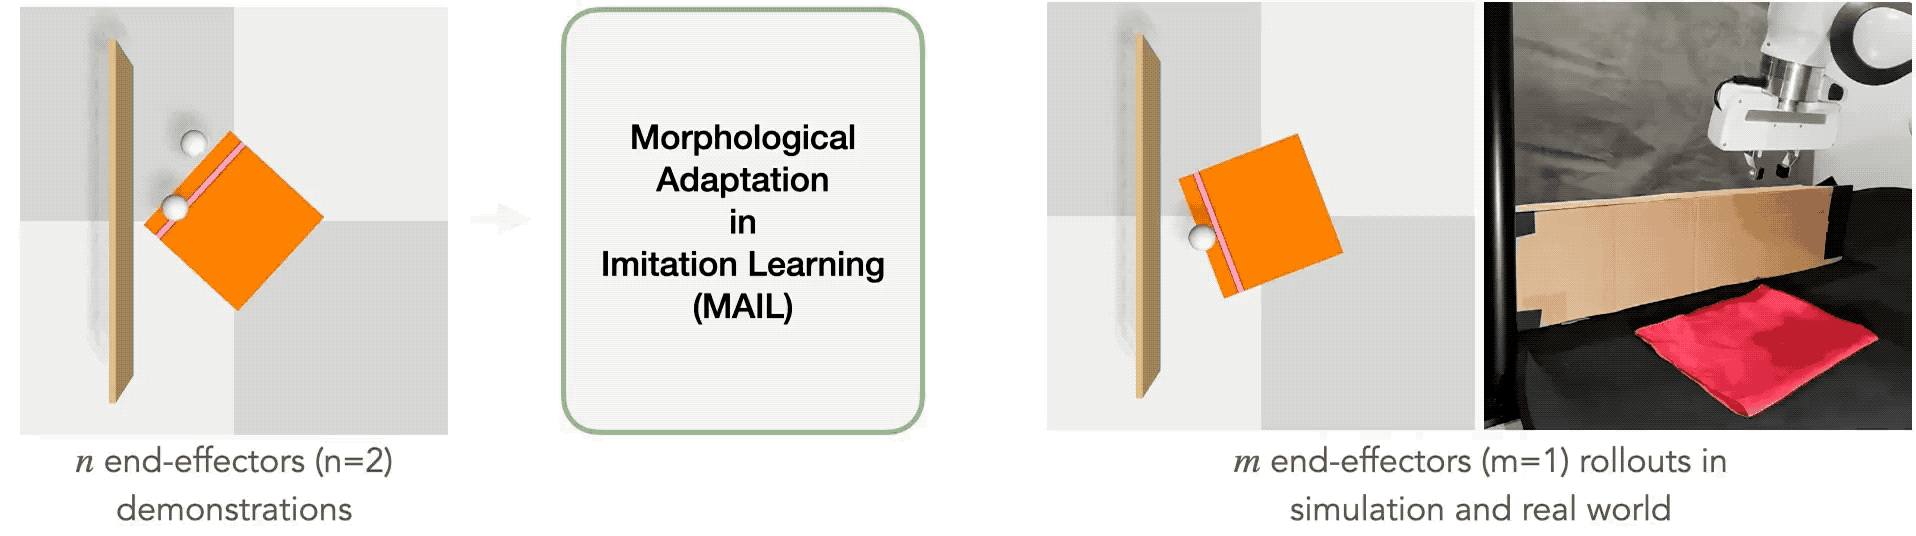 Morphological Adaption in Imitation Learning (MAIL)